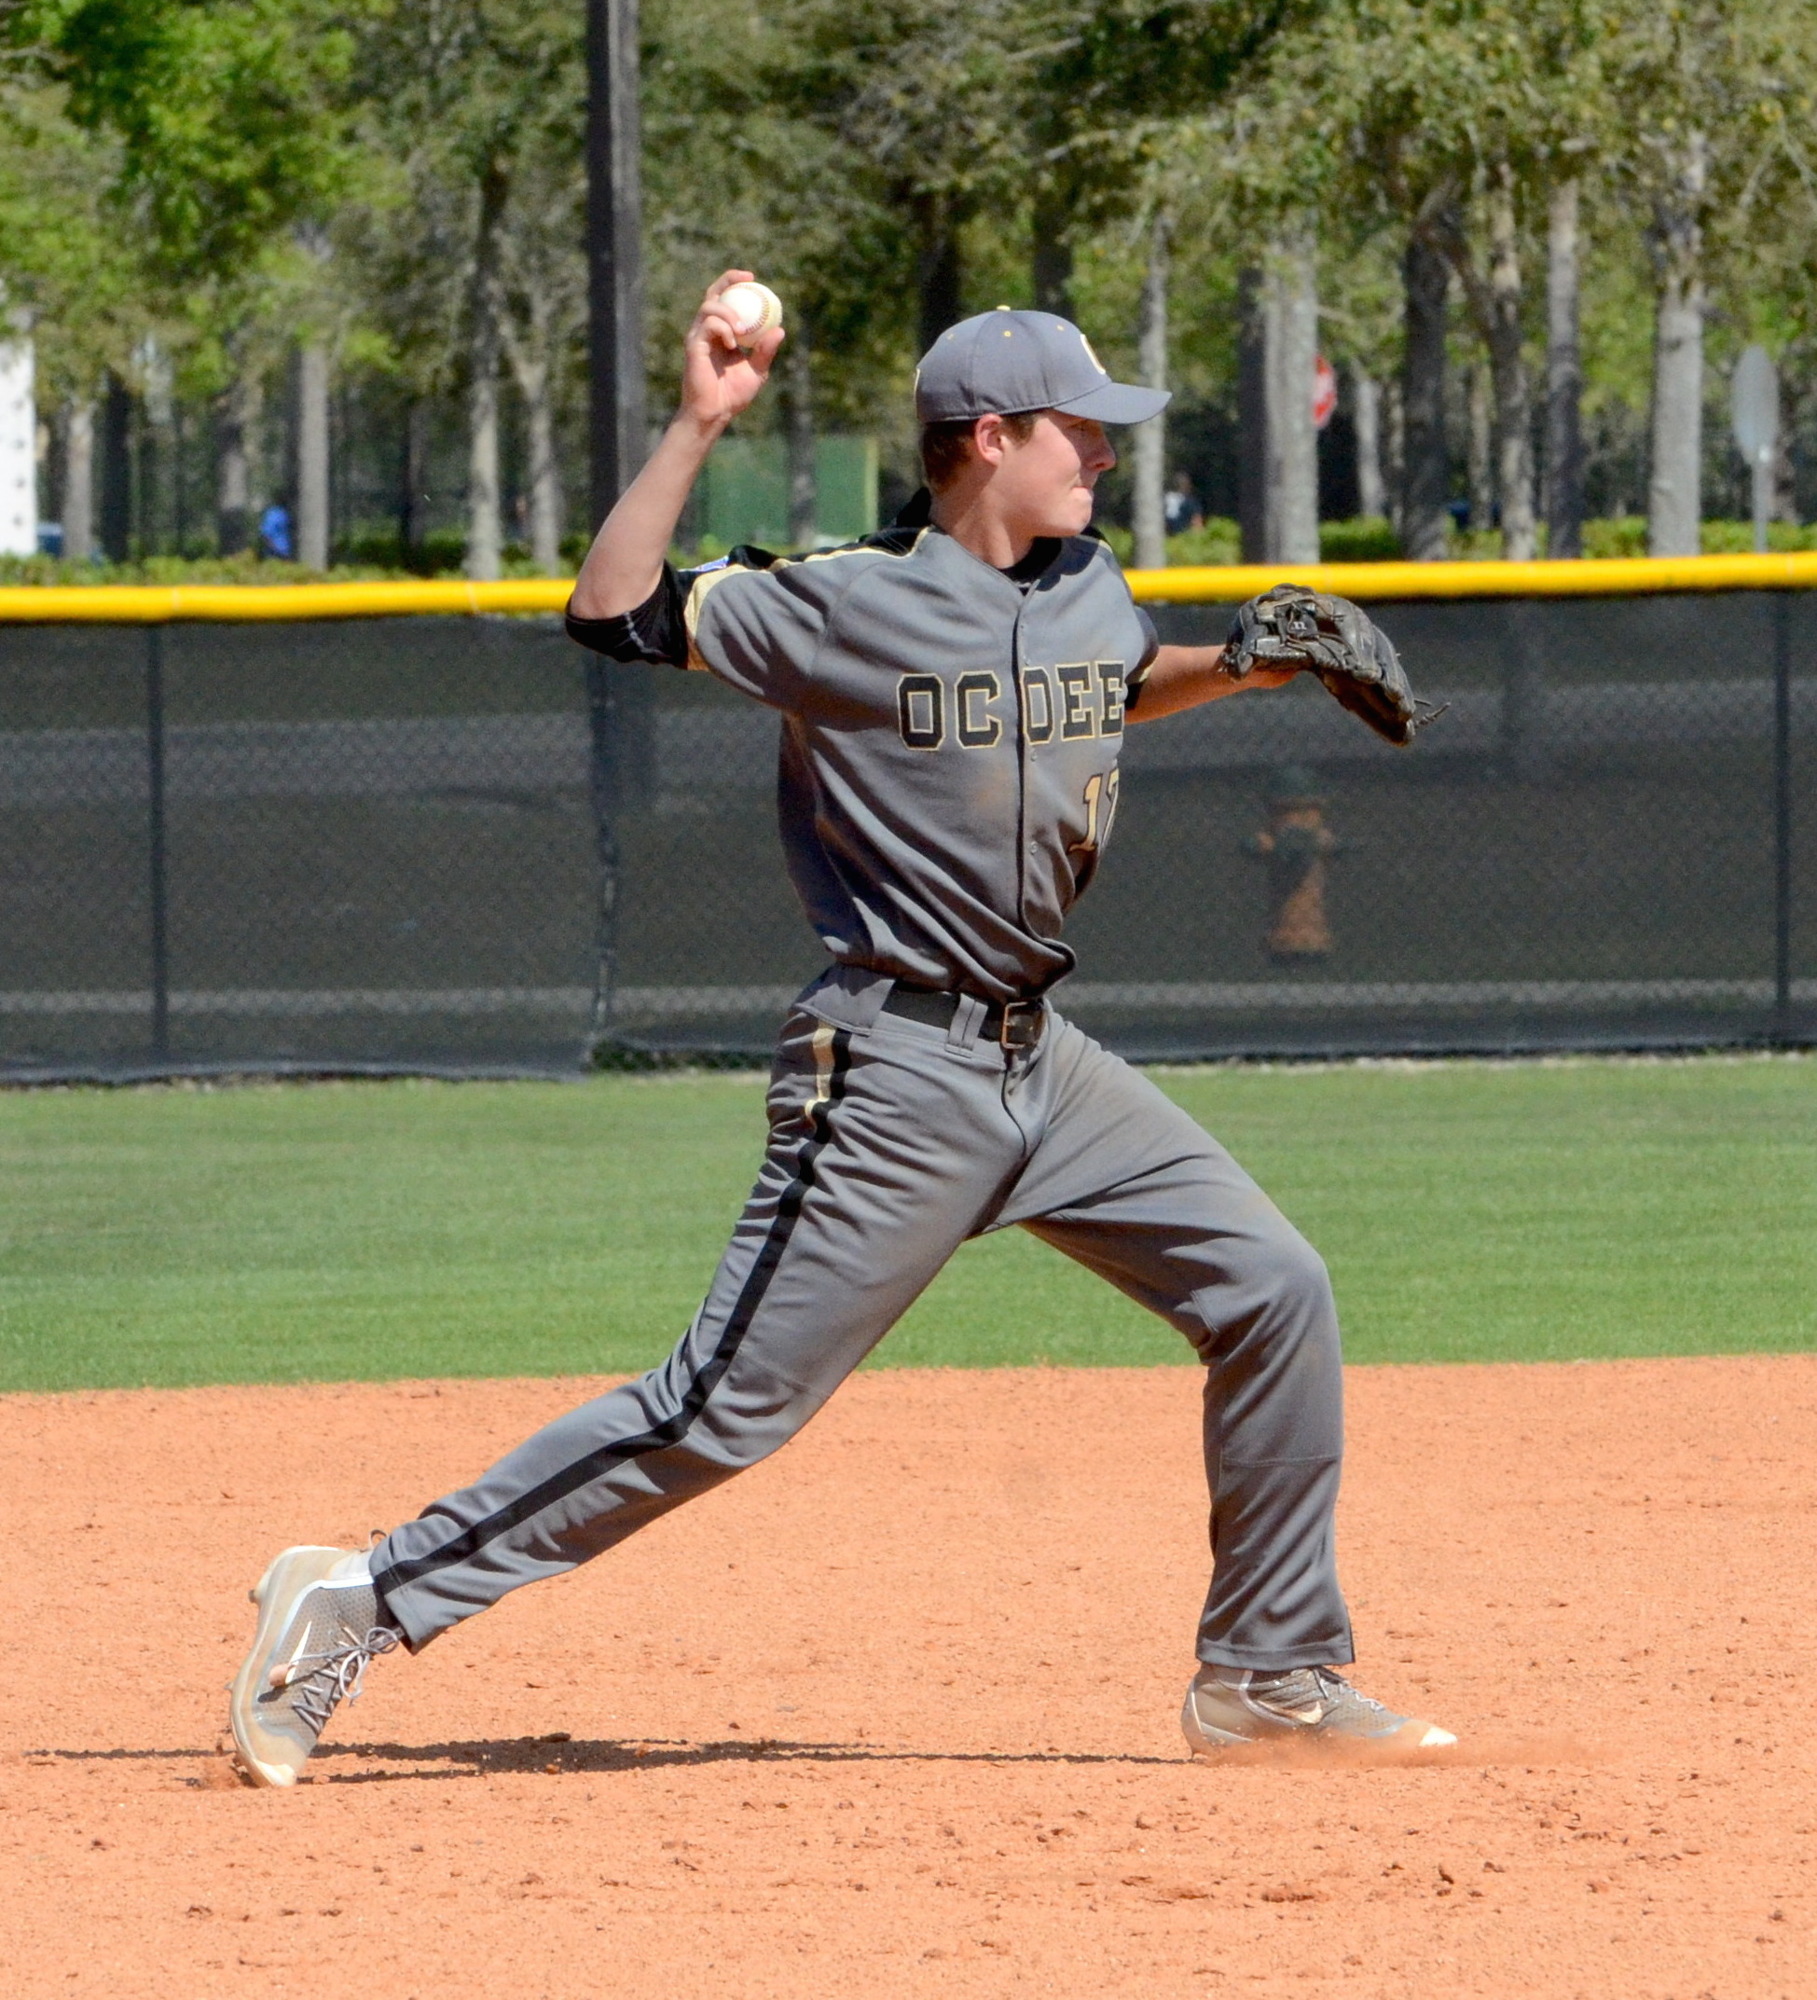 Ryan Brewer transferred to Ocoee after playing for Apopka for the first three years of his high school career and has been a welcome addition for the Knights.